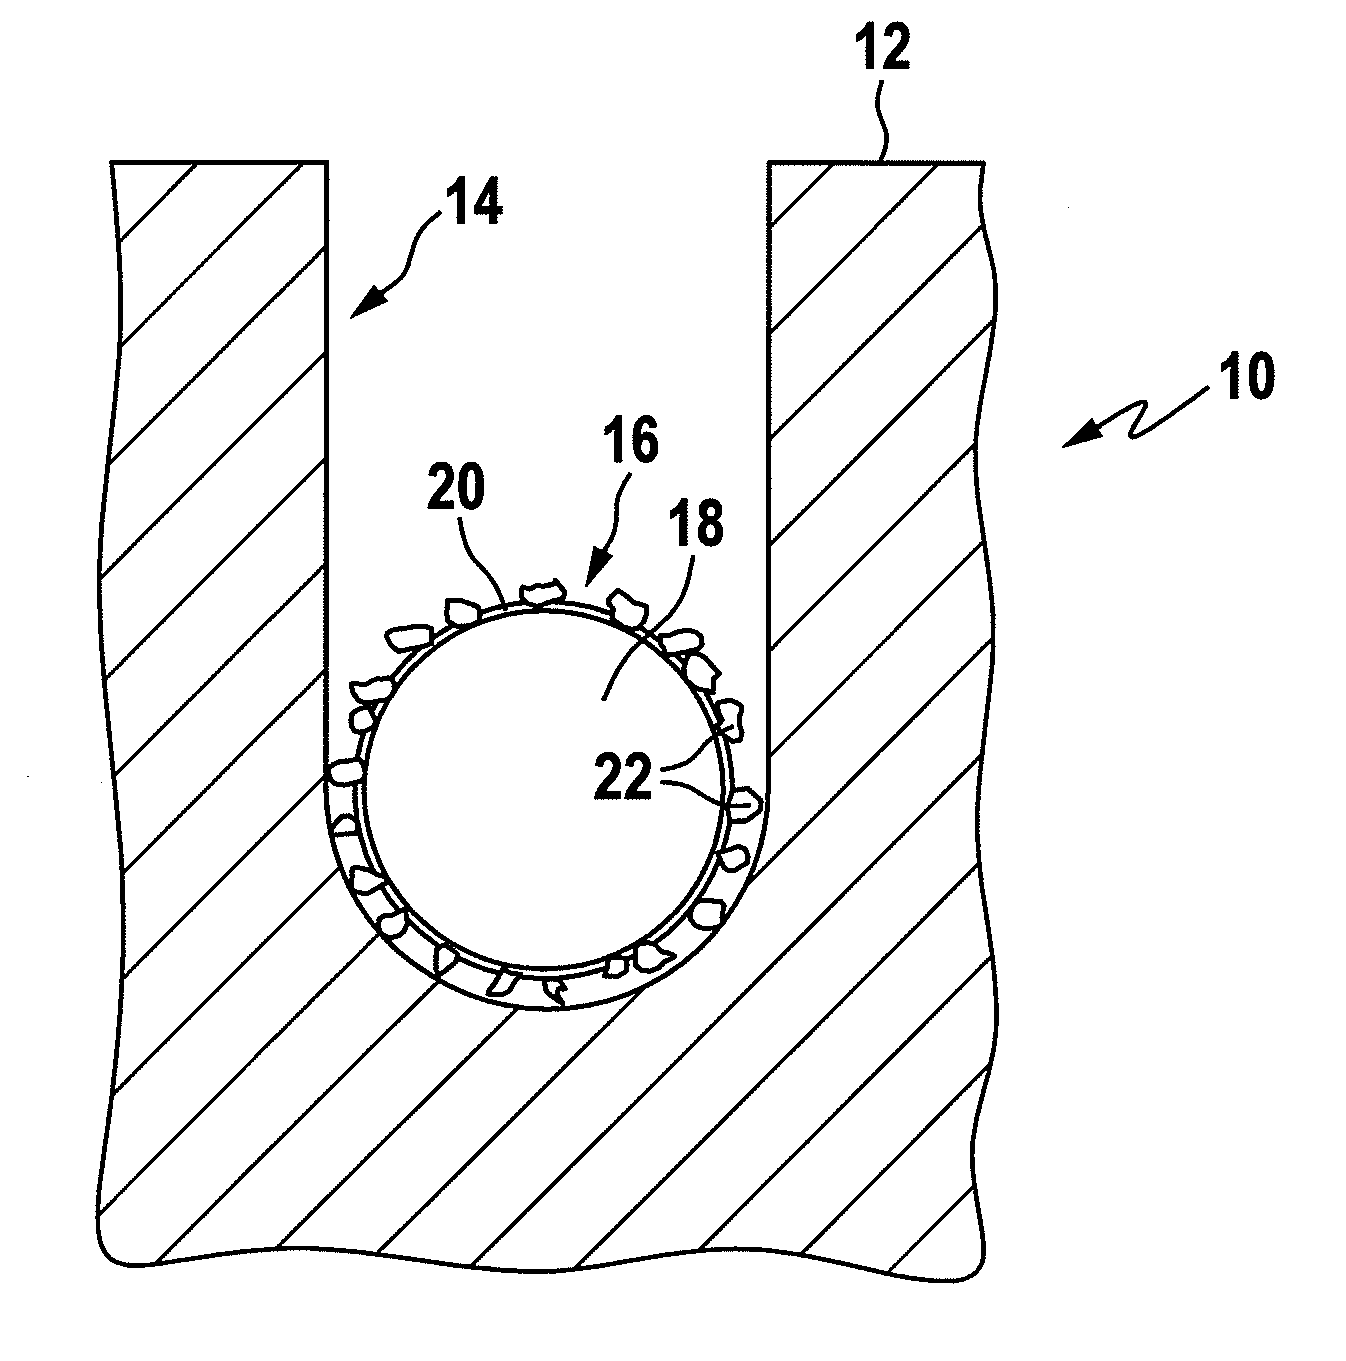 Method and system for manufacturing wafer-like slices from a substrate material